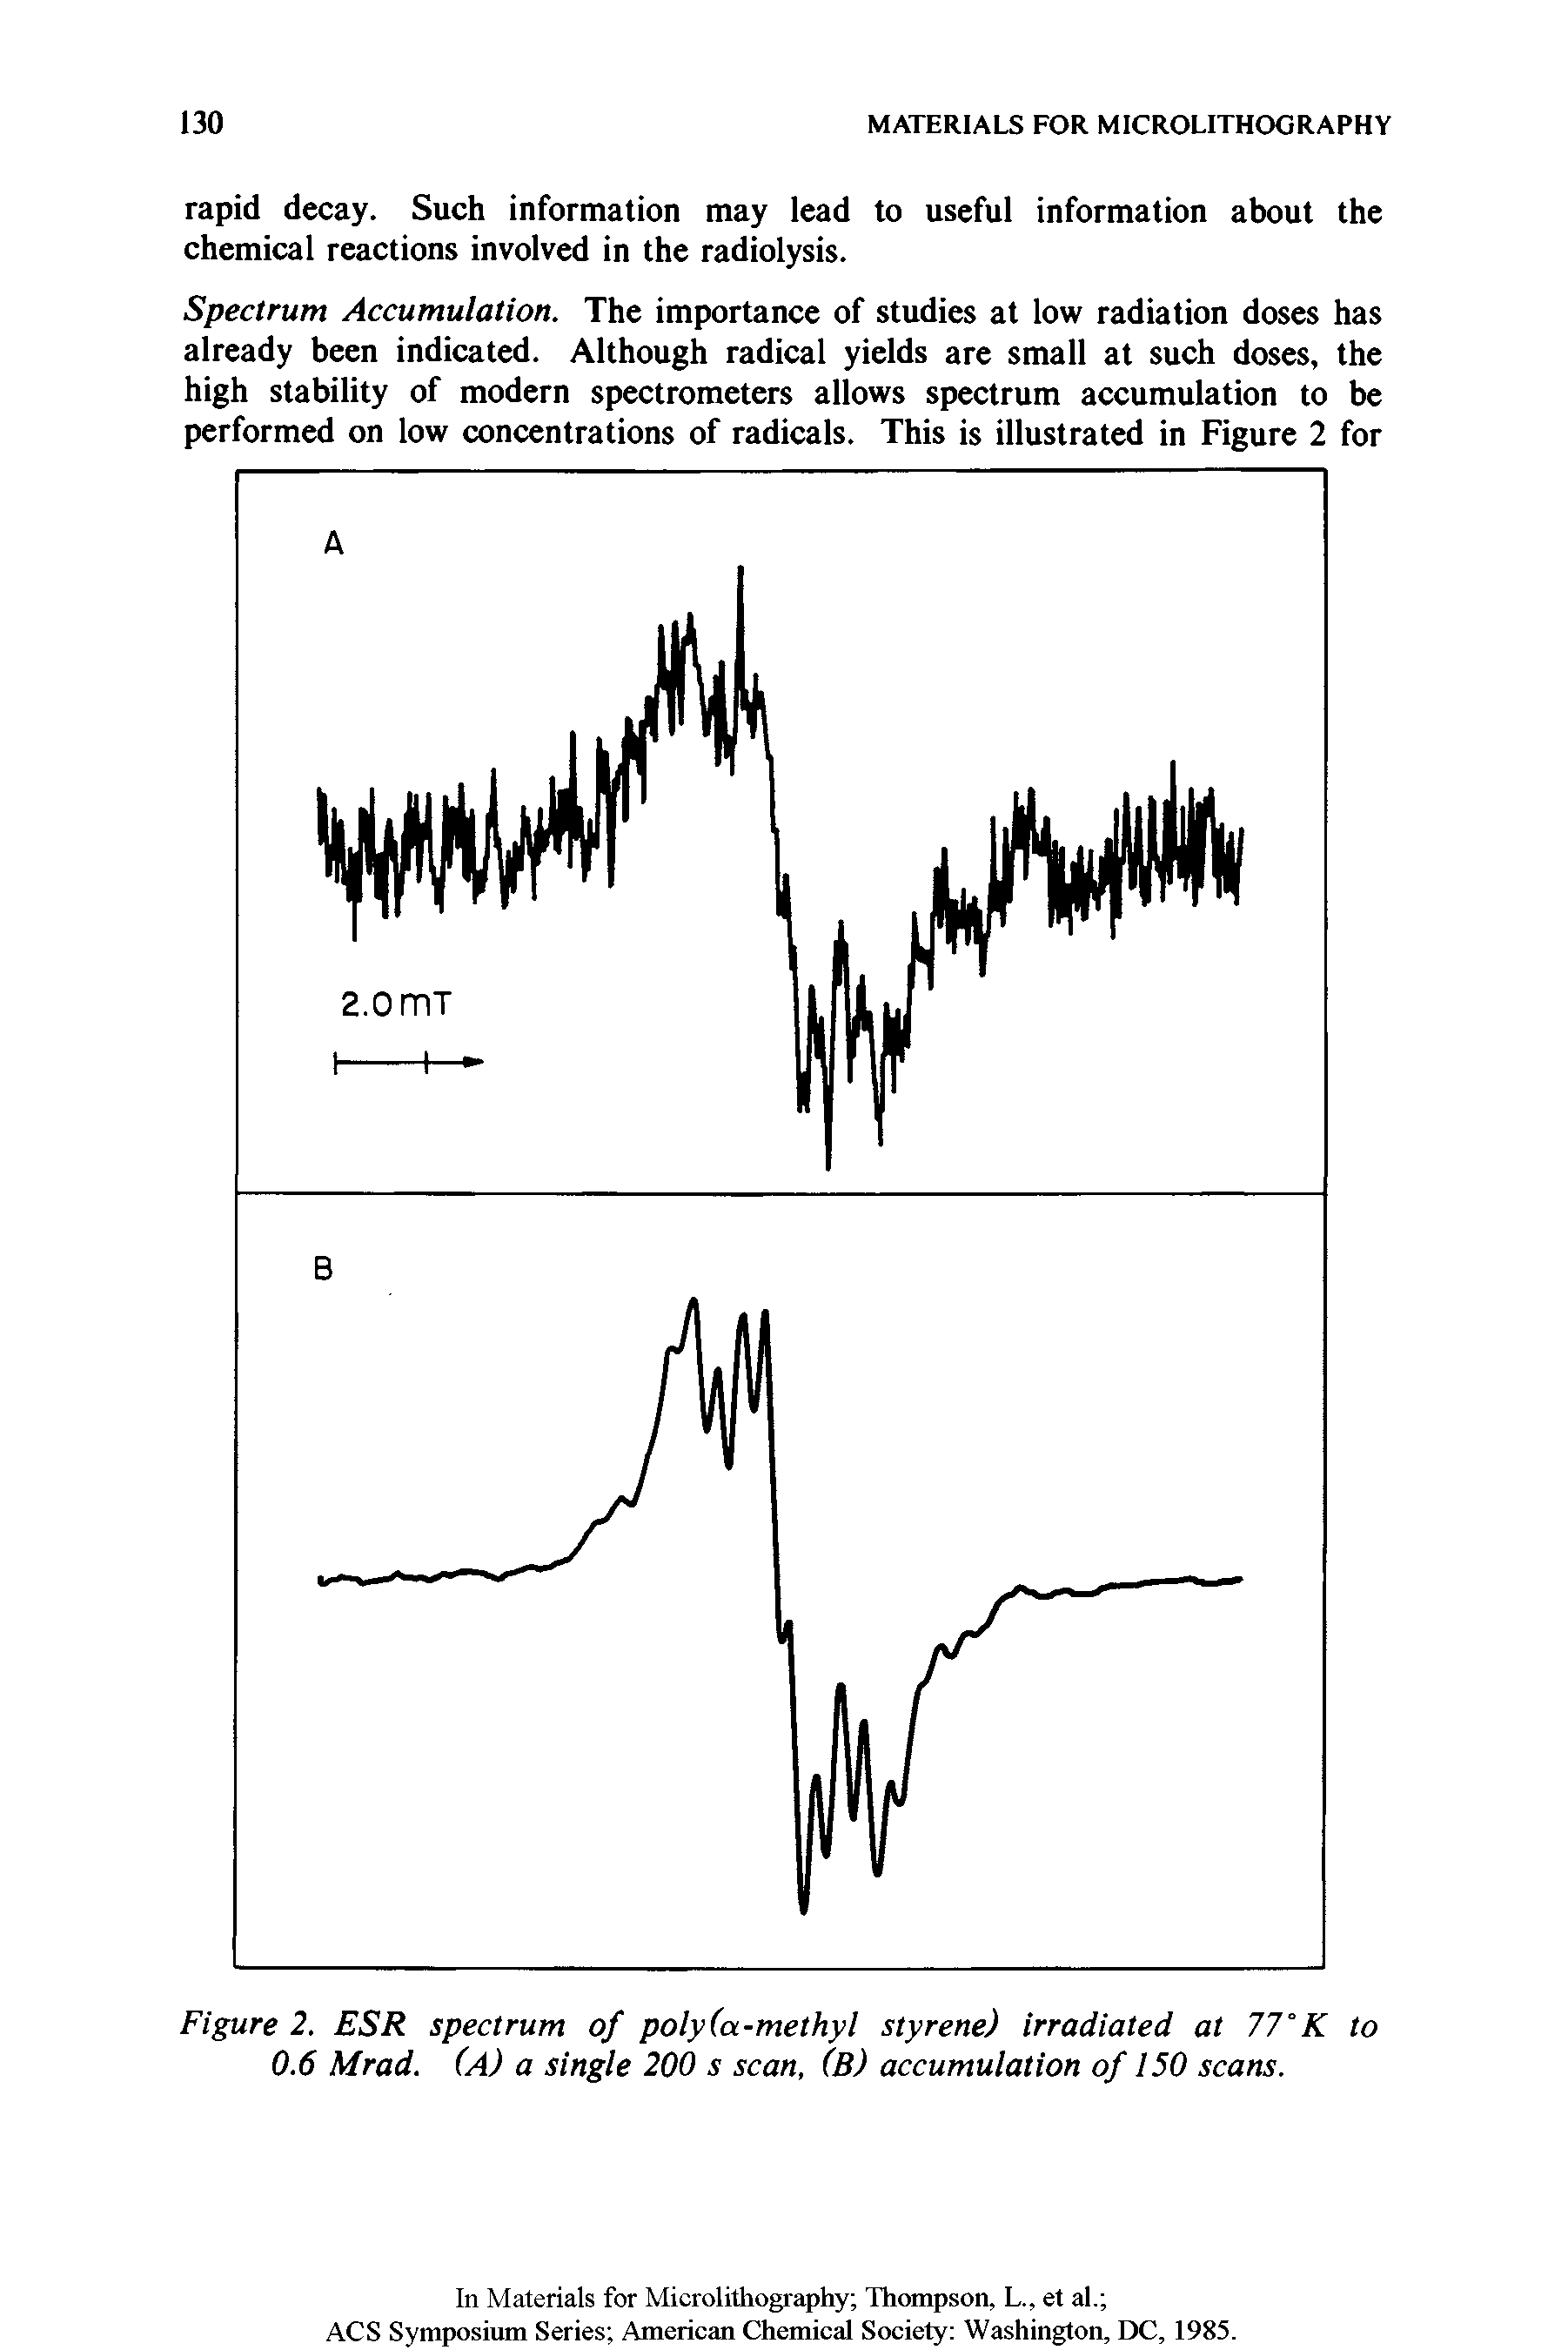 Figure 2. ESR spectrum of poly(a-methyl styrene) irradiated at 77° to 0.6 Mrad. (A) a single 200 s scan, (B) accumulation of 150 scans.